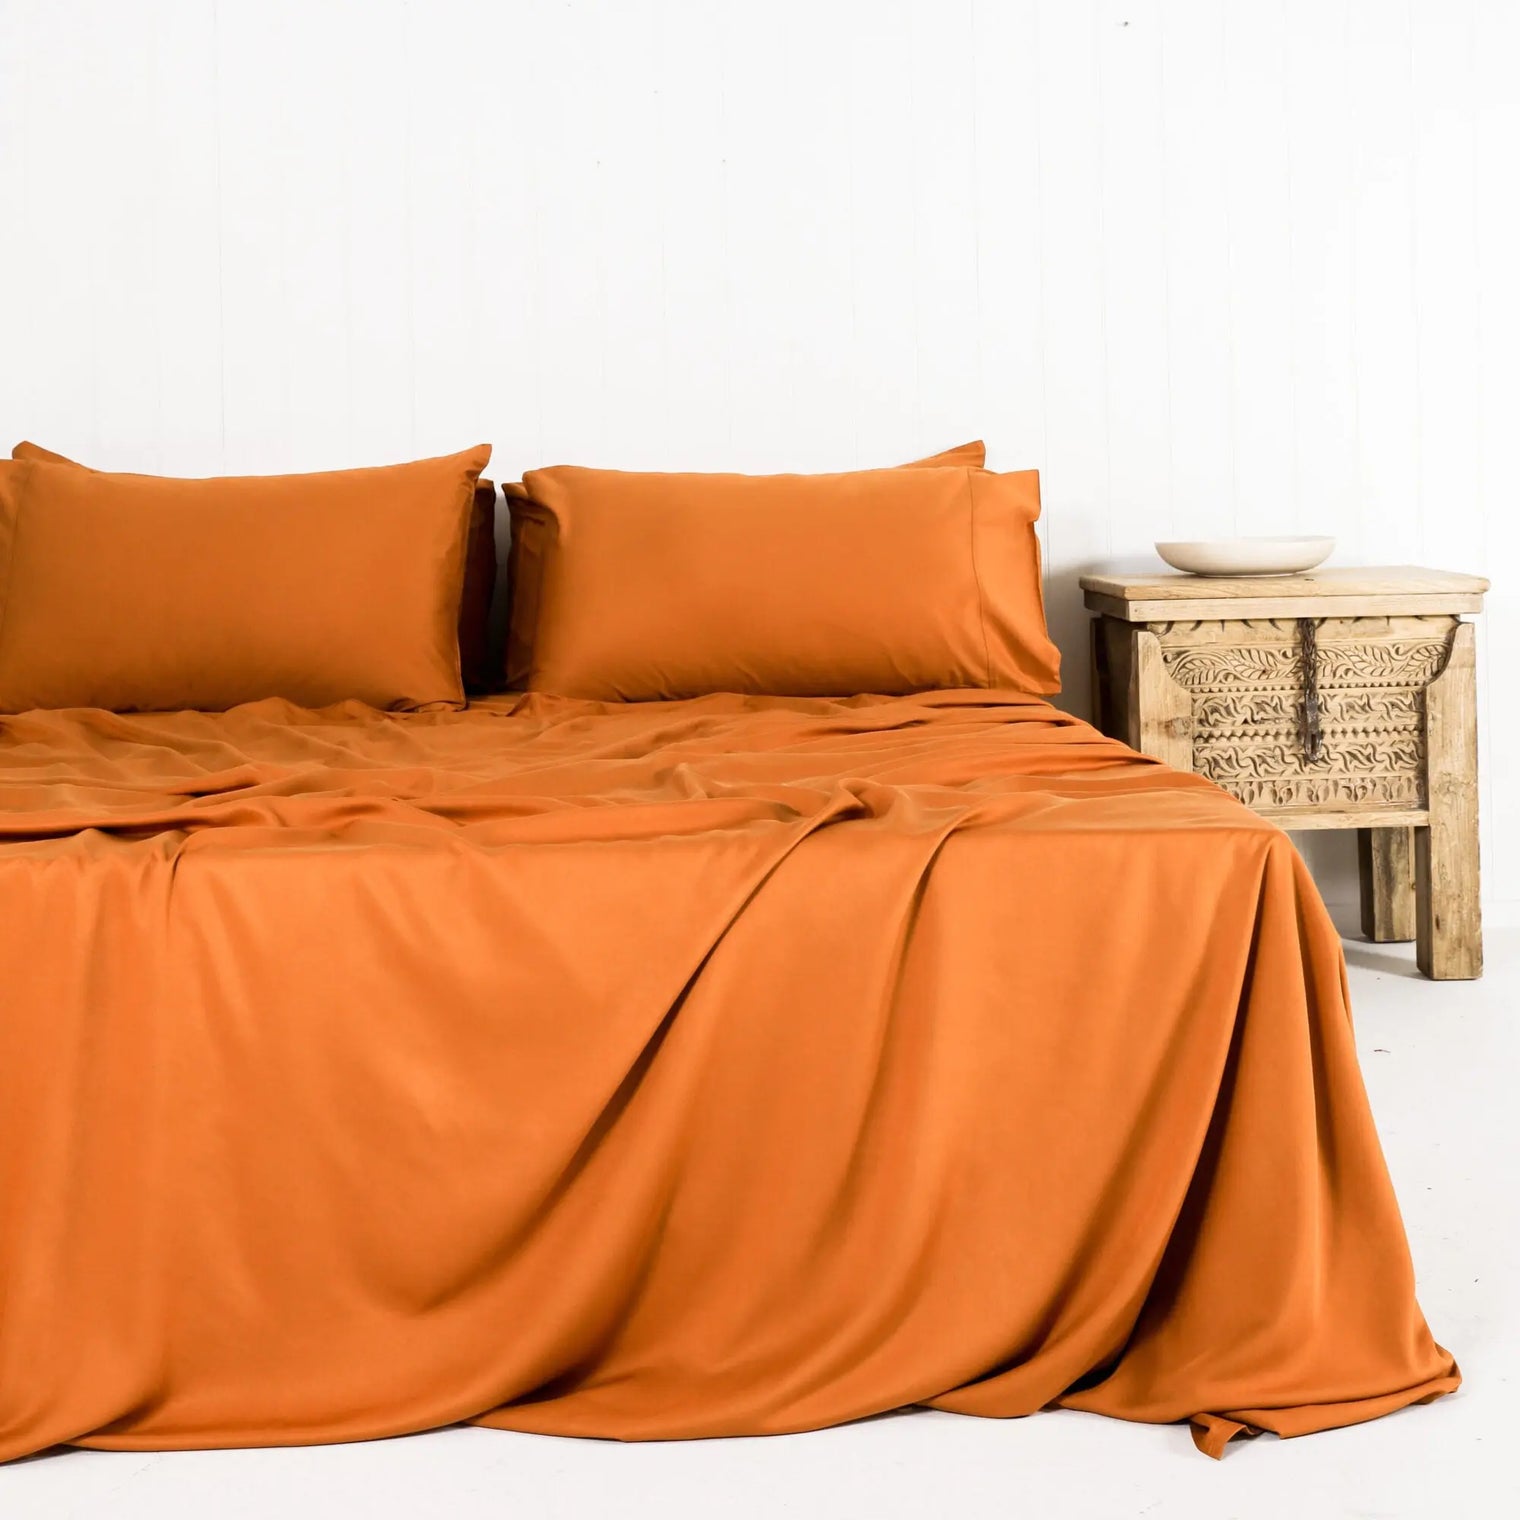 Bamboo vs Cotton Sheets: What's Better?